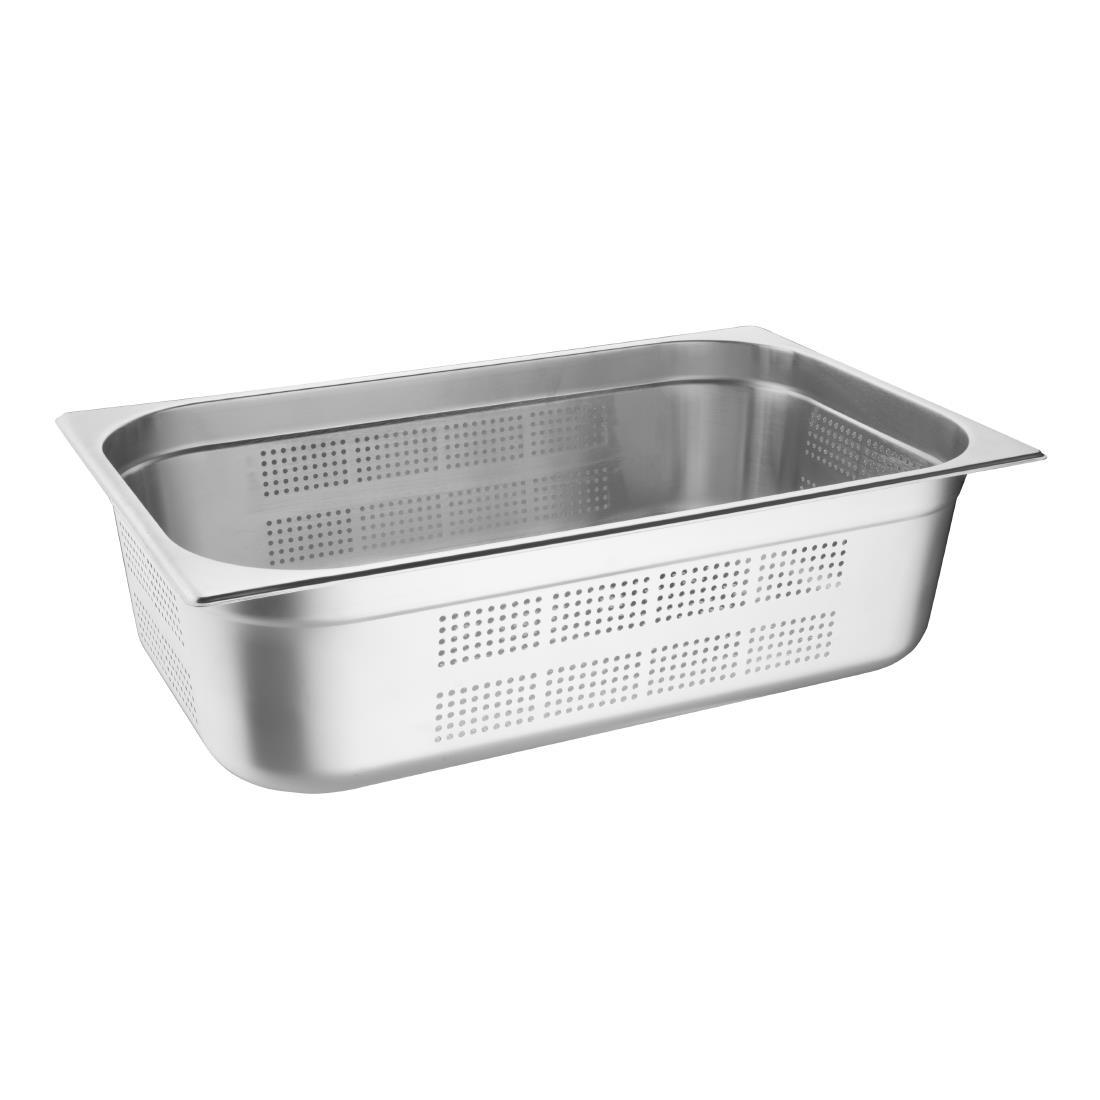 Vogue Stainless Steel Perforated 1/1 Gastronorm Pan 150mm - K842  - 1